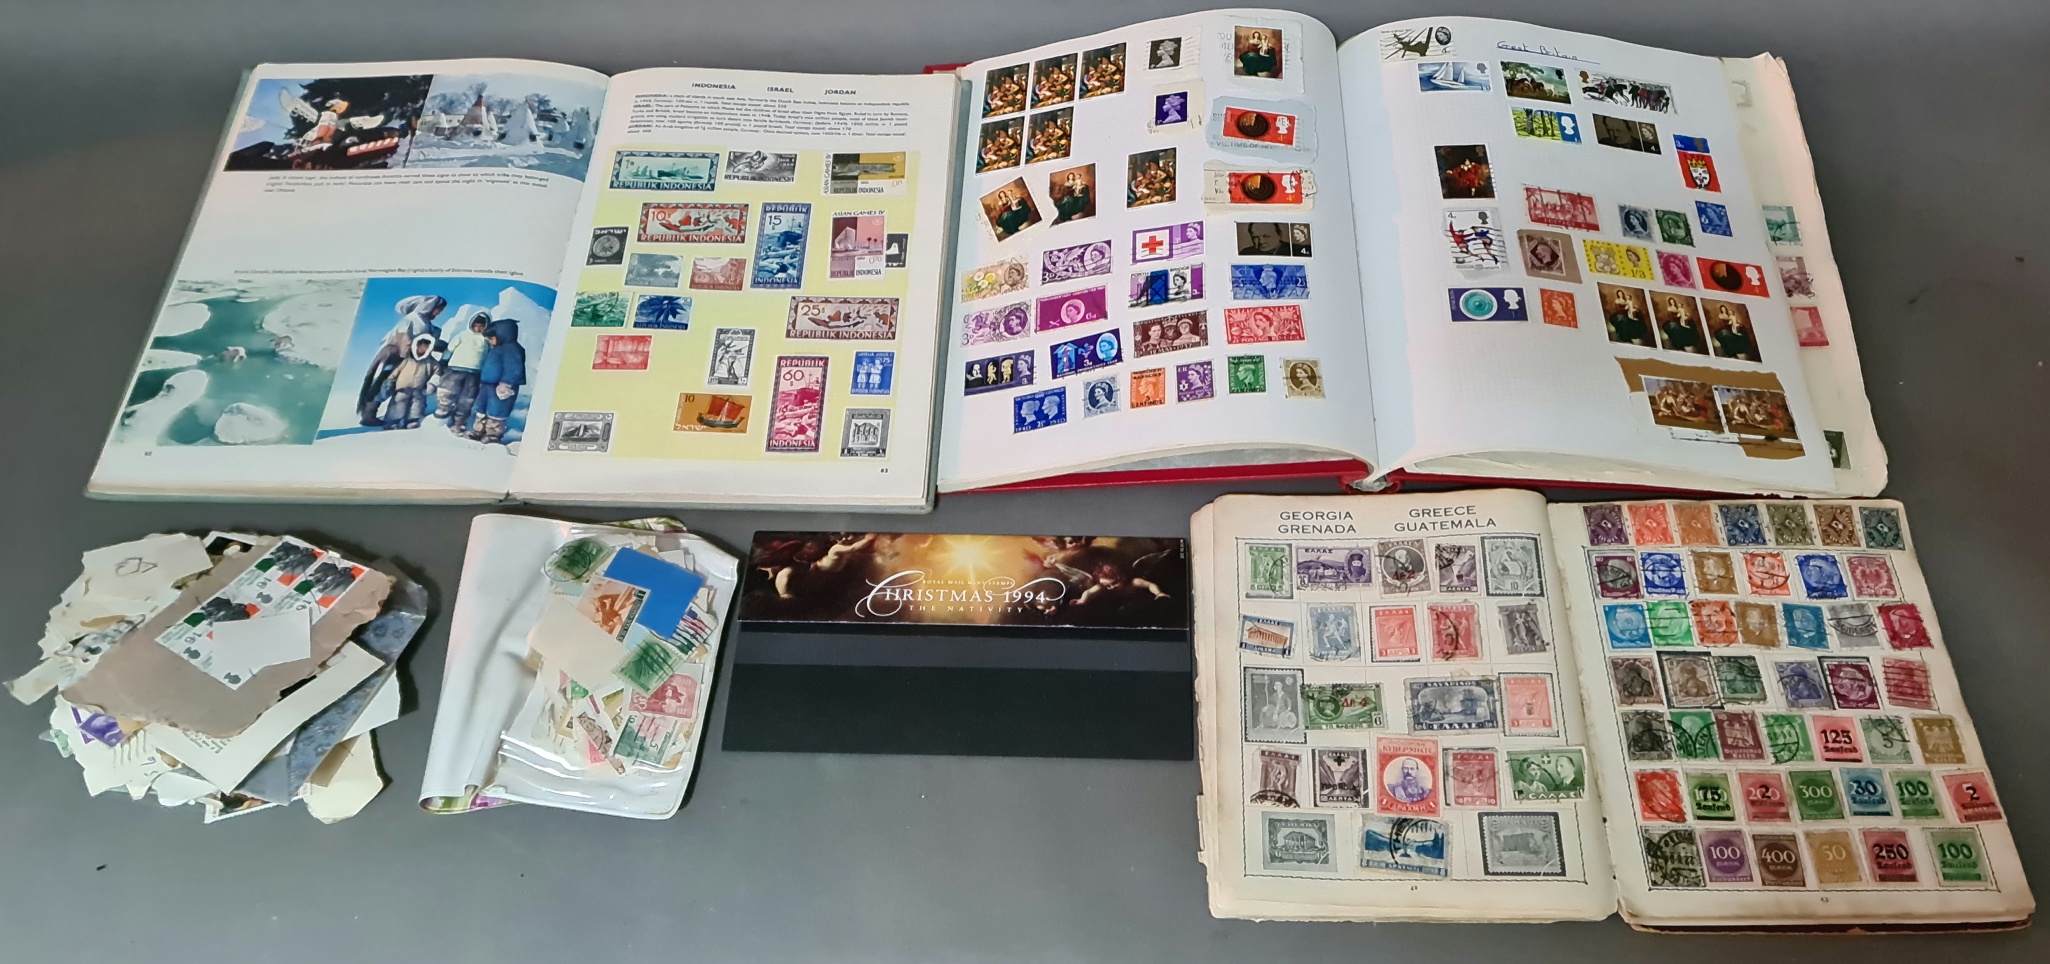 A box containing 3 stamp albums and loose stamps